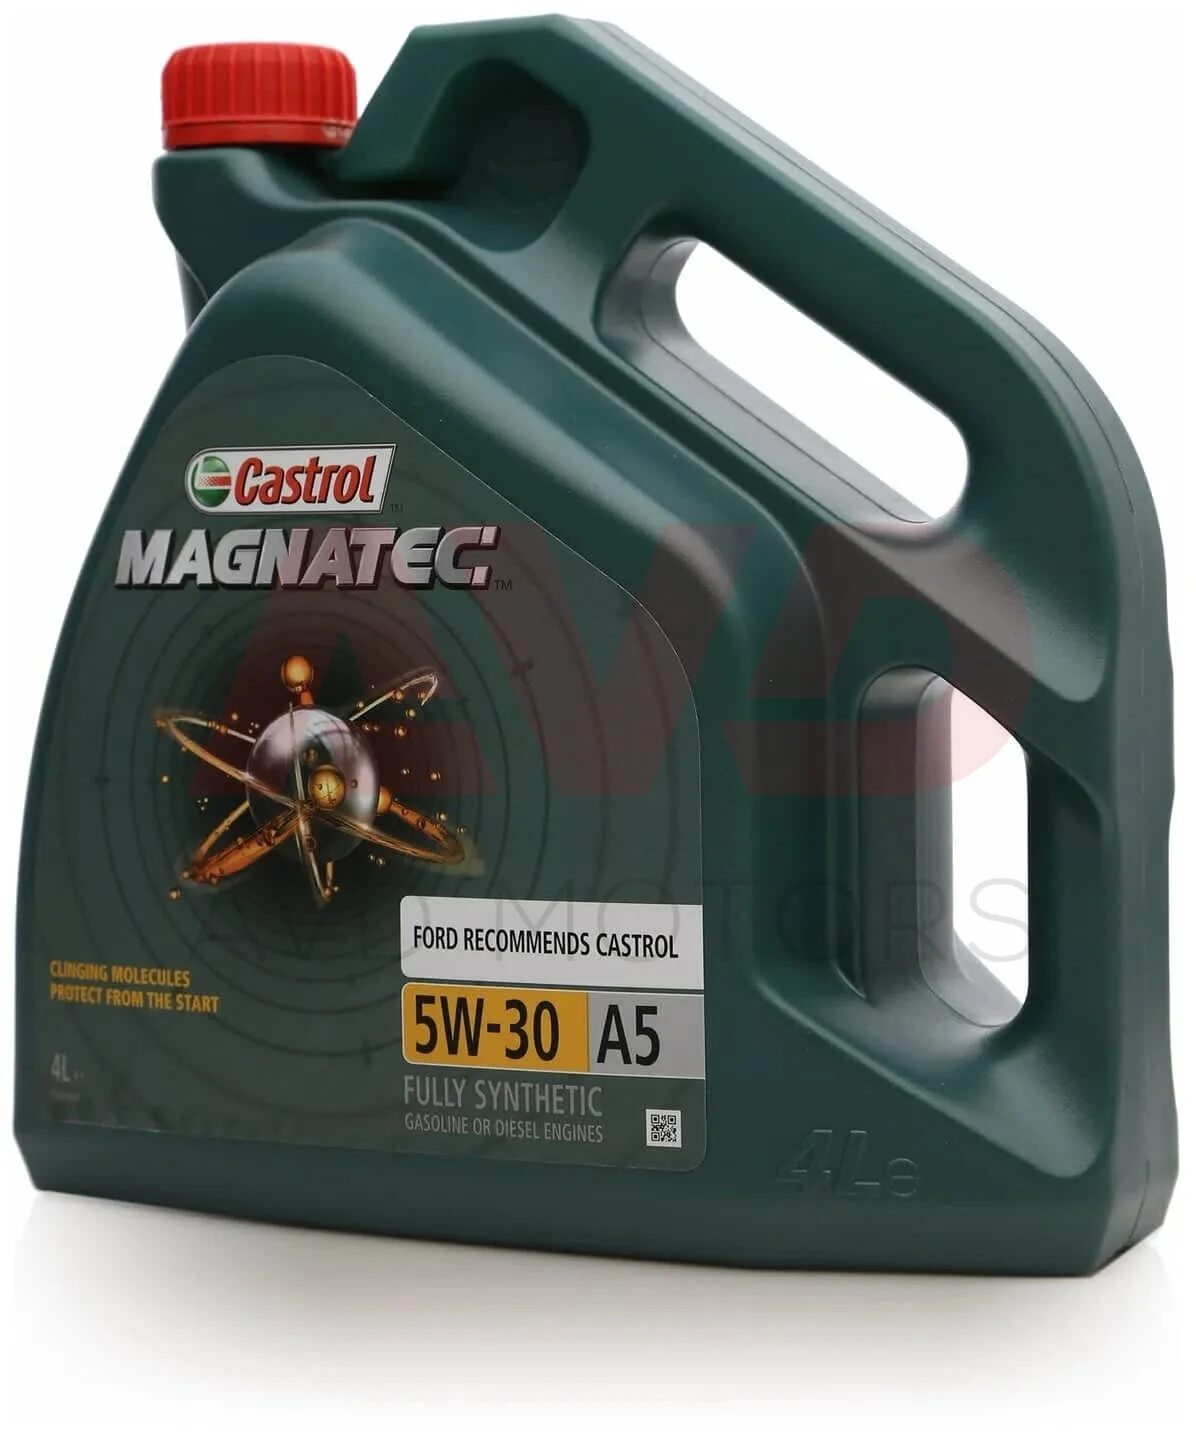 Castrol Magnatec 5w-30 AP 4 Л. Magnatec AP 5w30 (5 л). Castrol Magnatec AP 5w-30, 1л. Castrol 5w30 Magnatec 4л Ford.